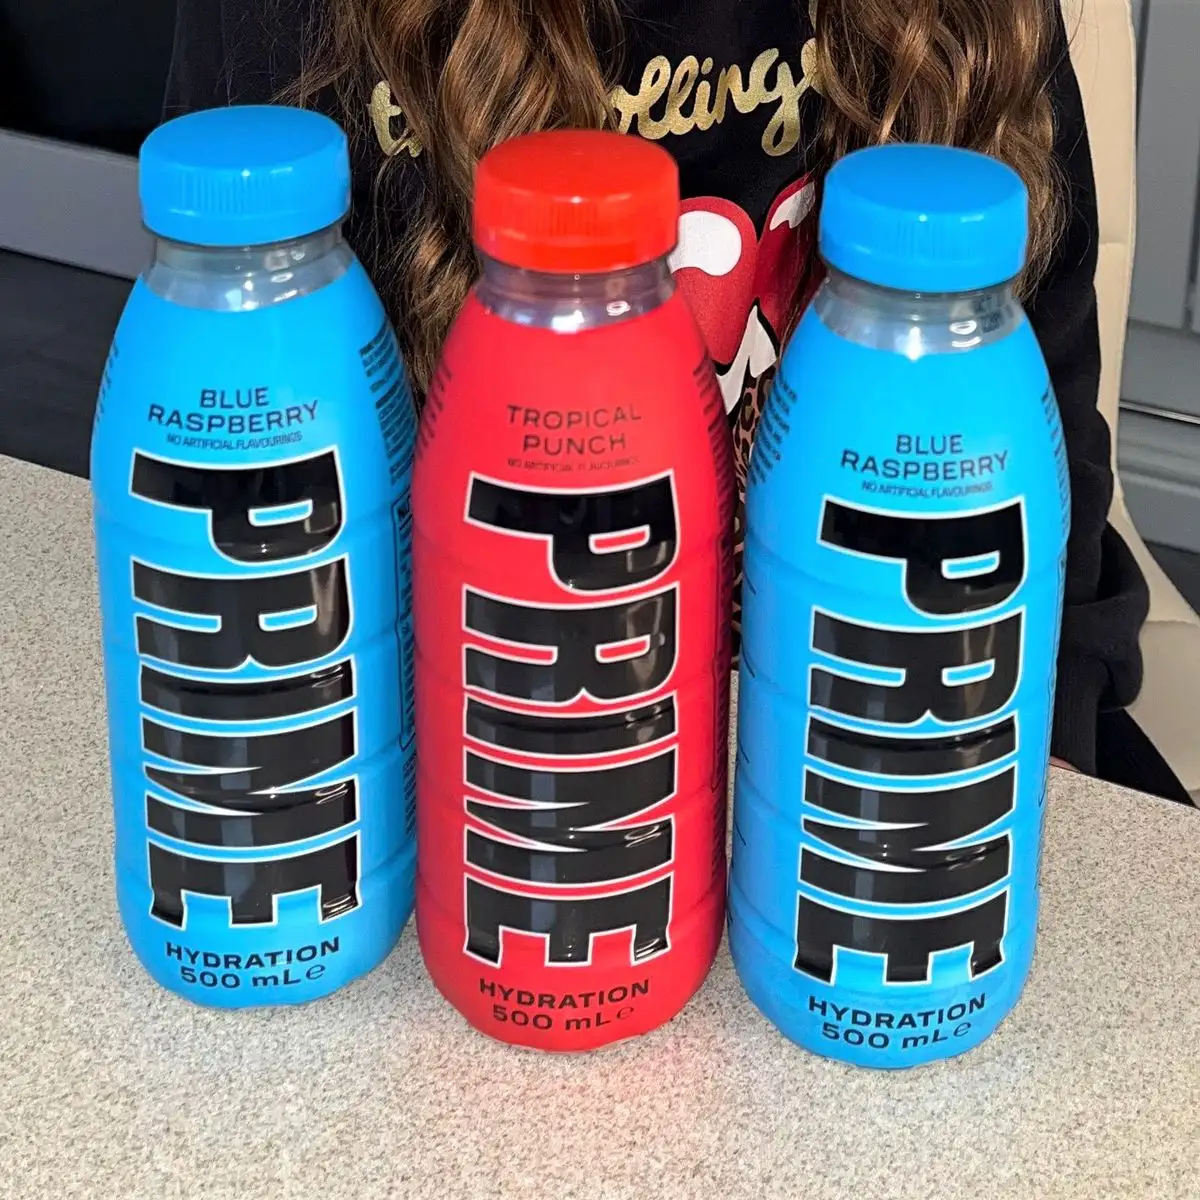 Hot Sale Prime hydration energy drink for sale